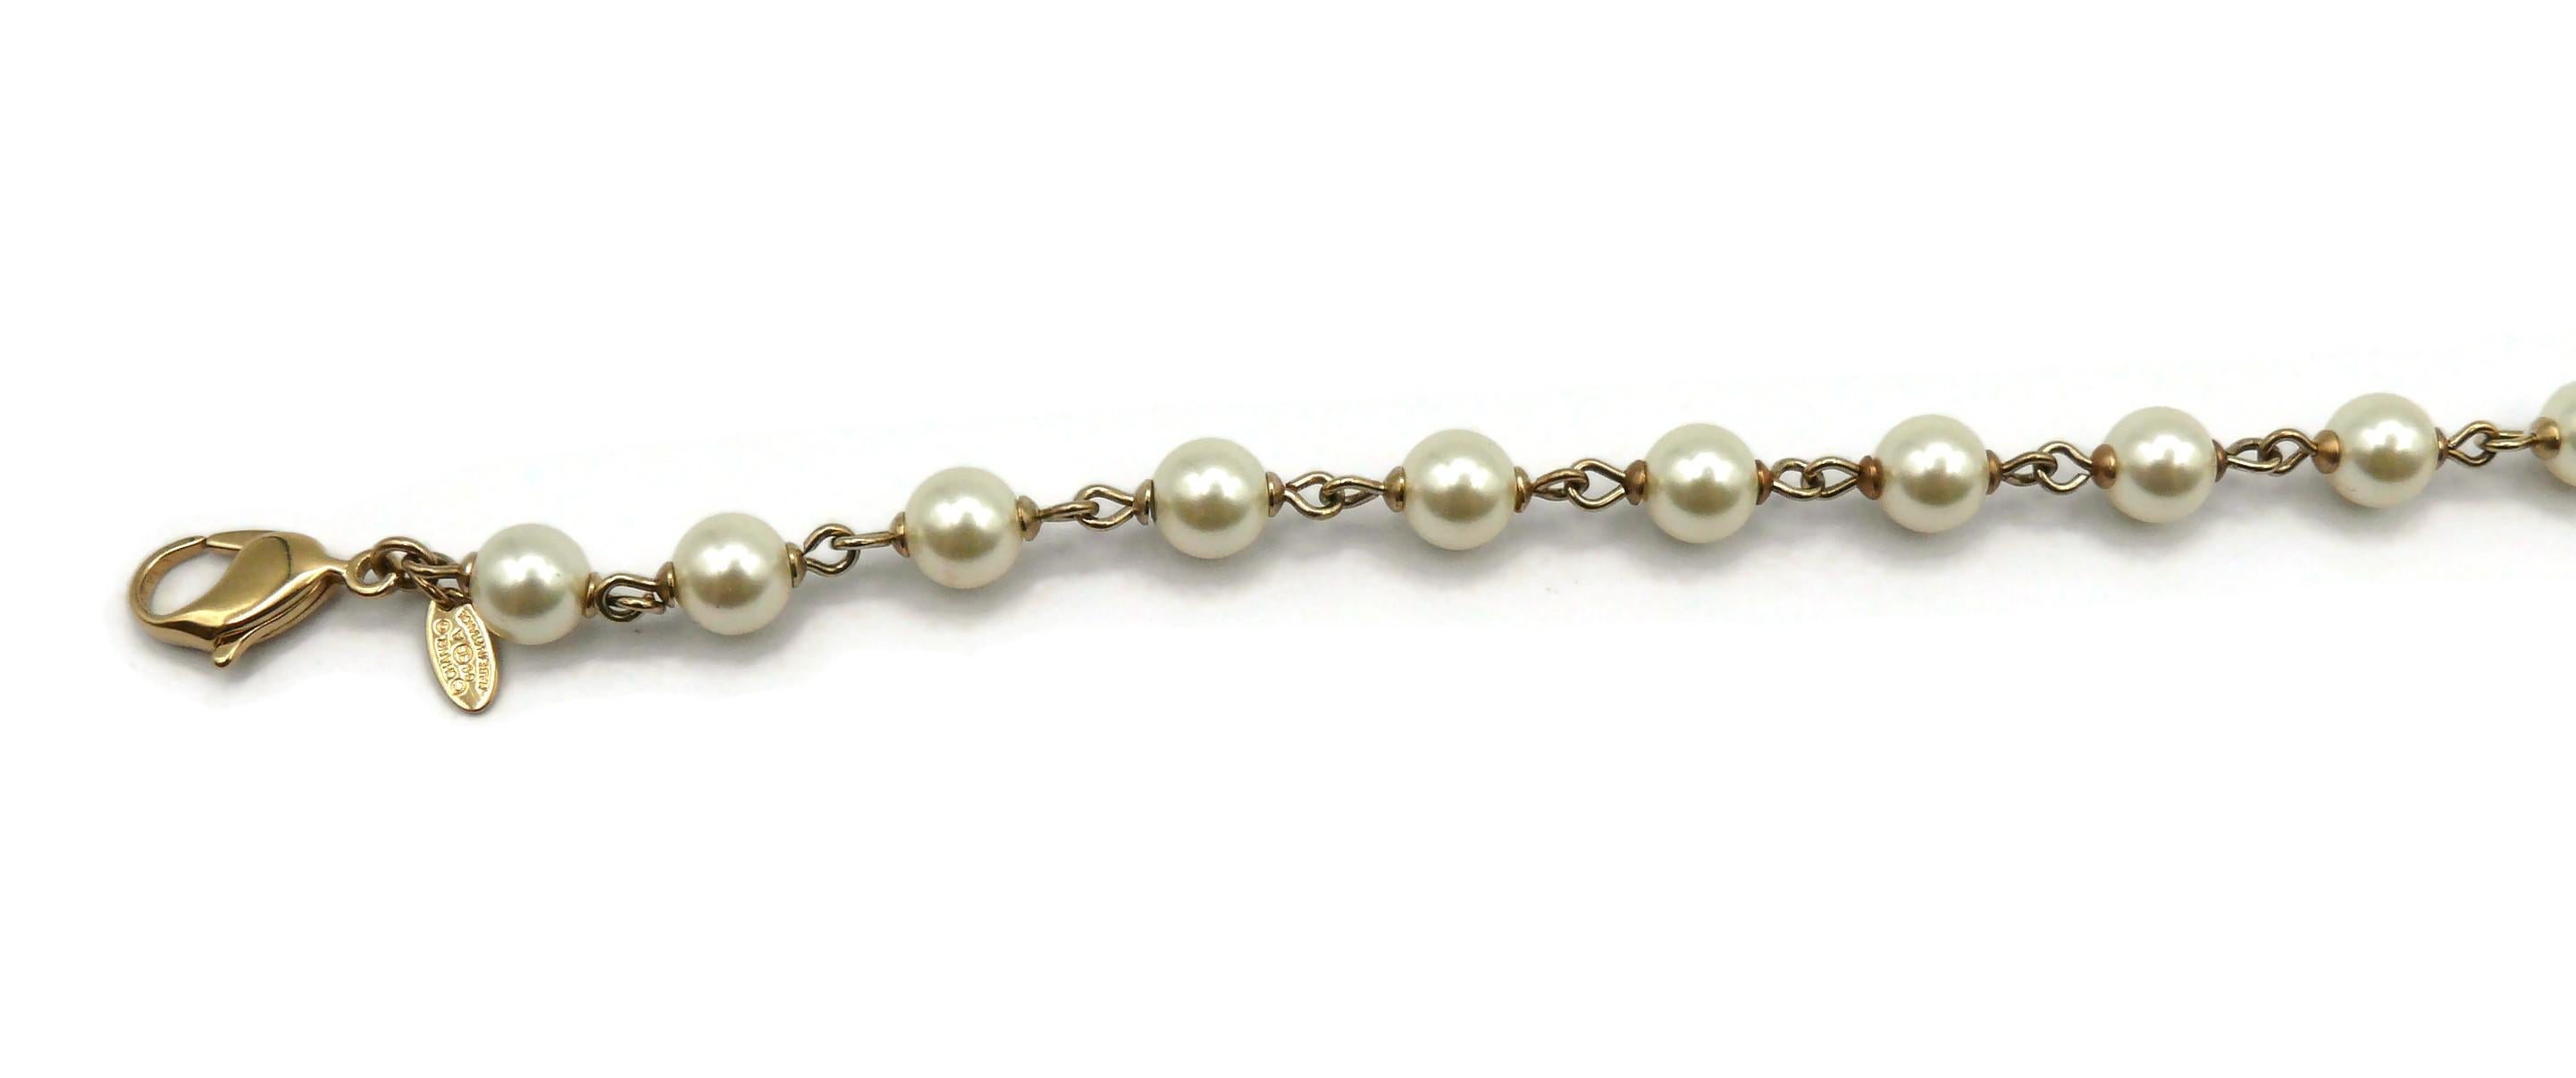 CHANEL by KARL LAGERFELD Faux Pearl CC Logo Necklace, 2008 For Sale 1